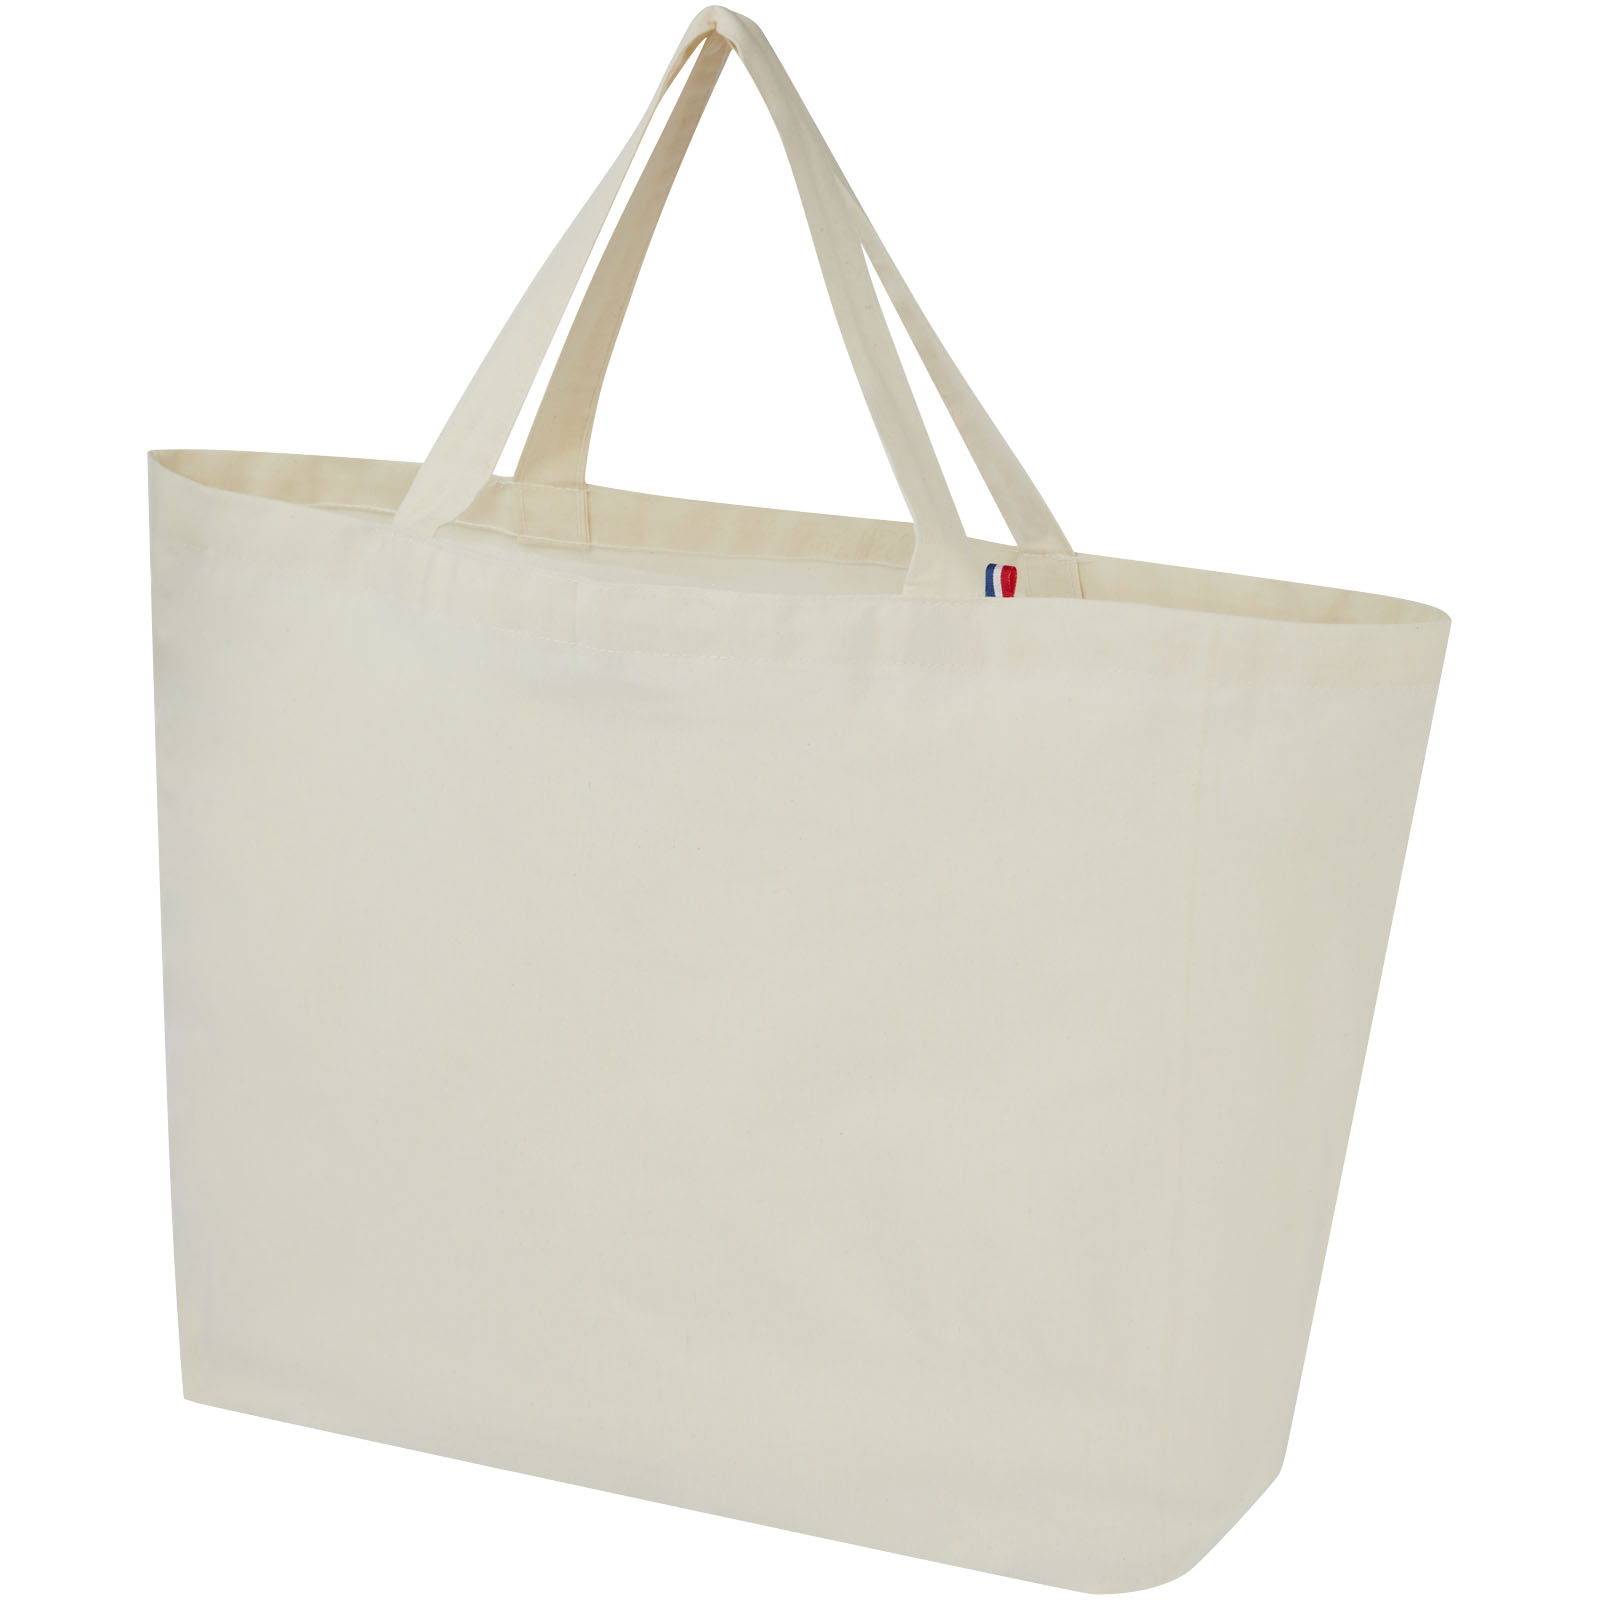 Shopping & Tote Bags - Cannes 200 g/m2 recycled shopper tote bag 10L